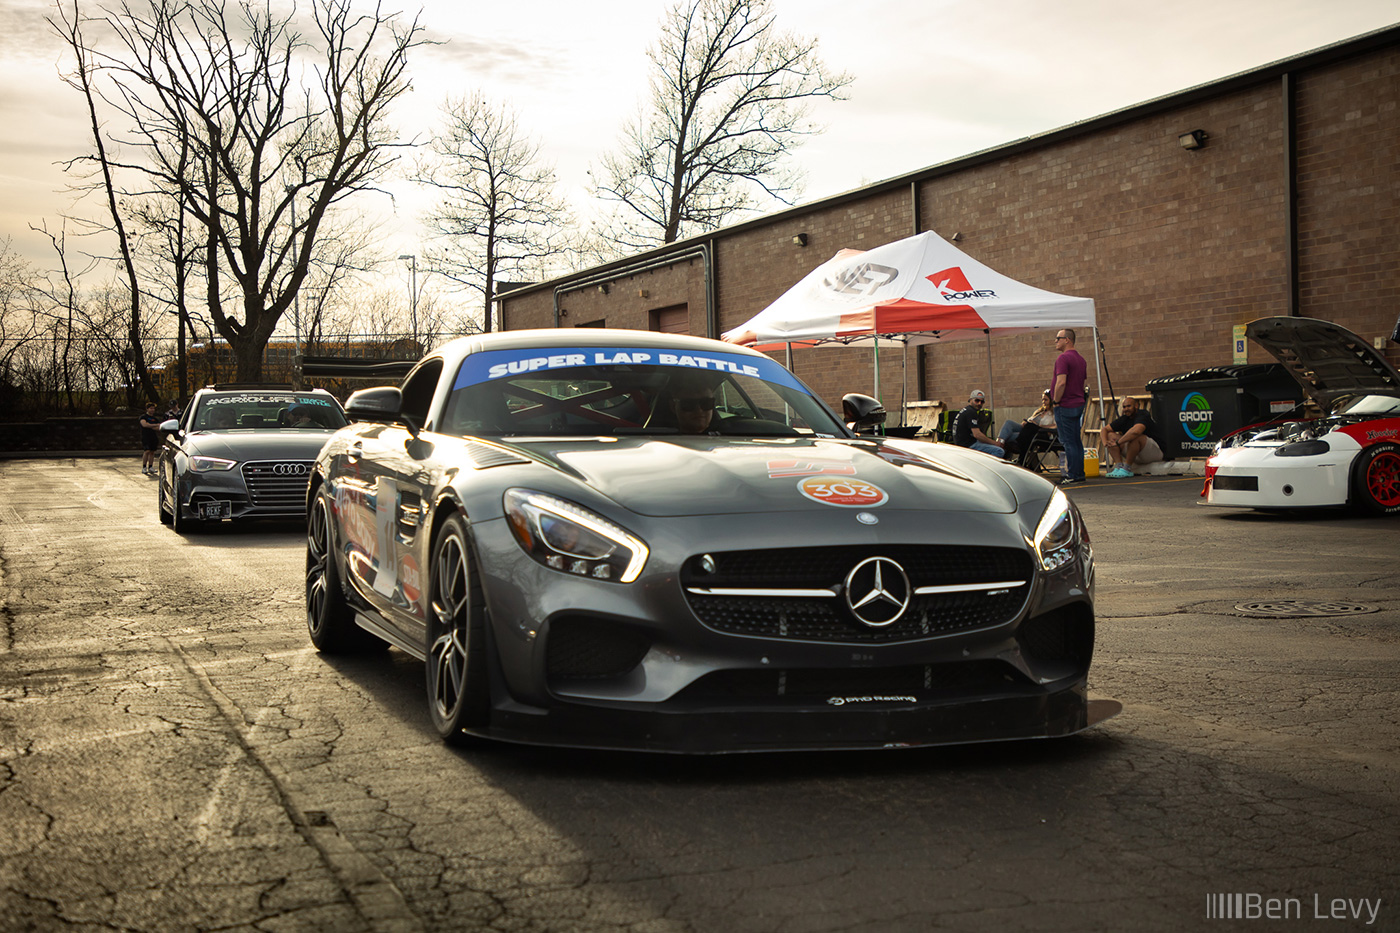 Mercedes-Benz AMG GTS with "Super Lap Battle" windshield banner